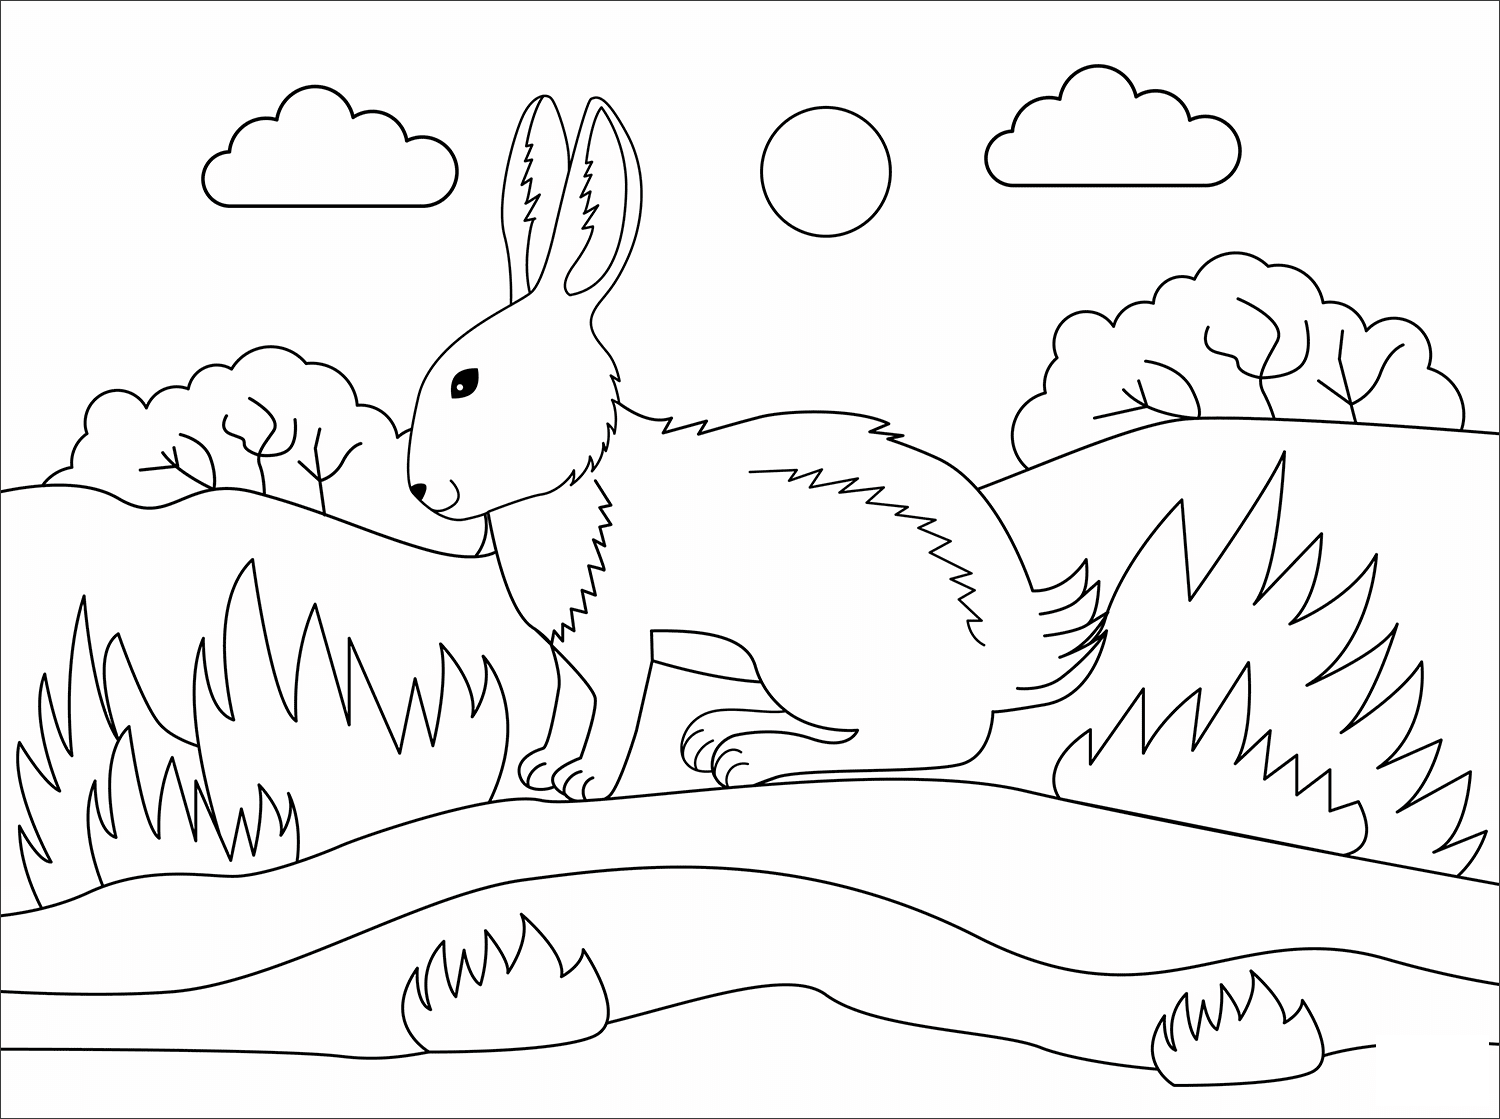 Bunny Animal Simple Coloring Page